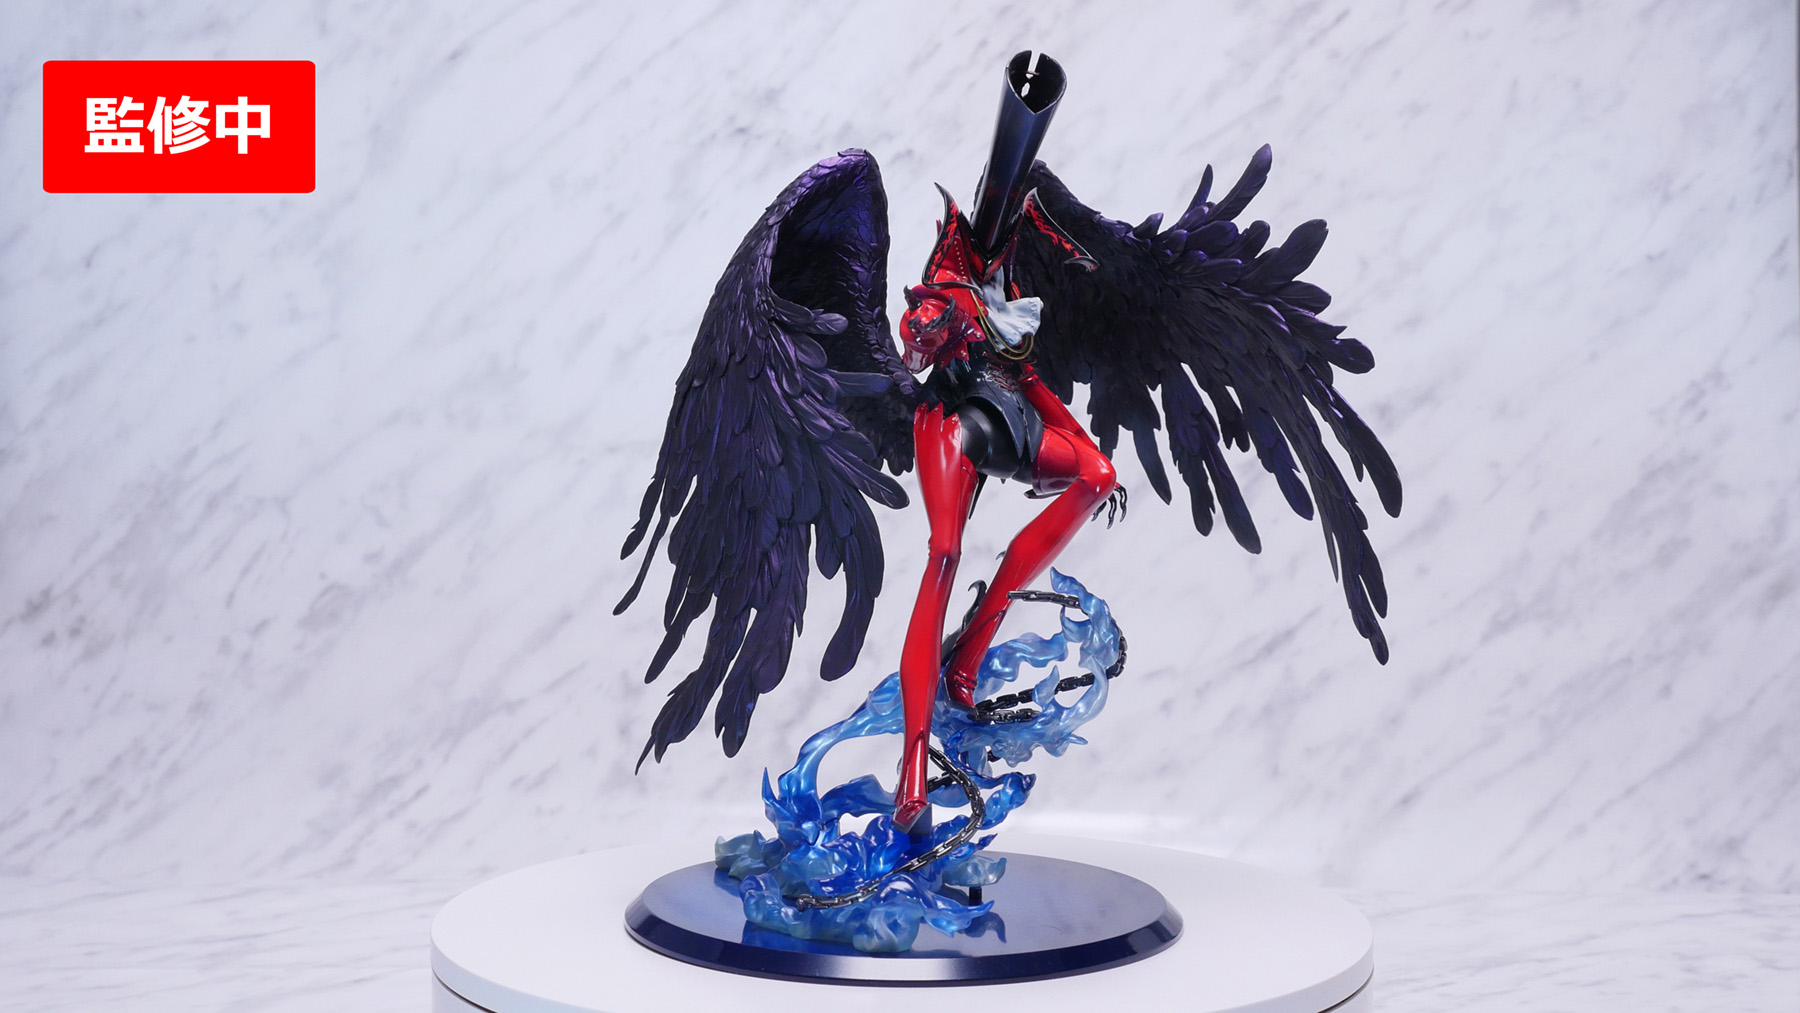 Persona 5 - Arsène - Game Characters Collection DX - Anniversary Edition (MegaHouse)